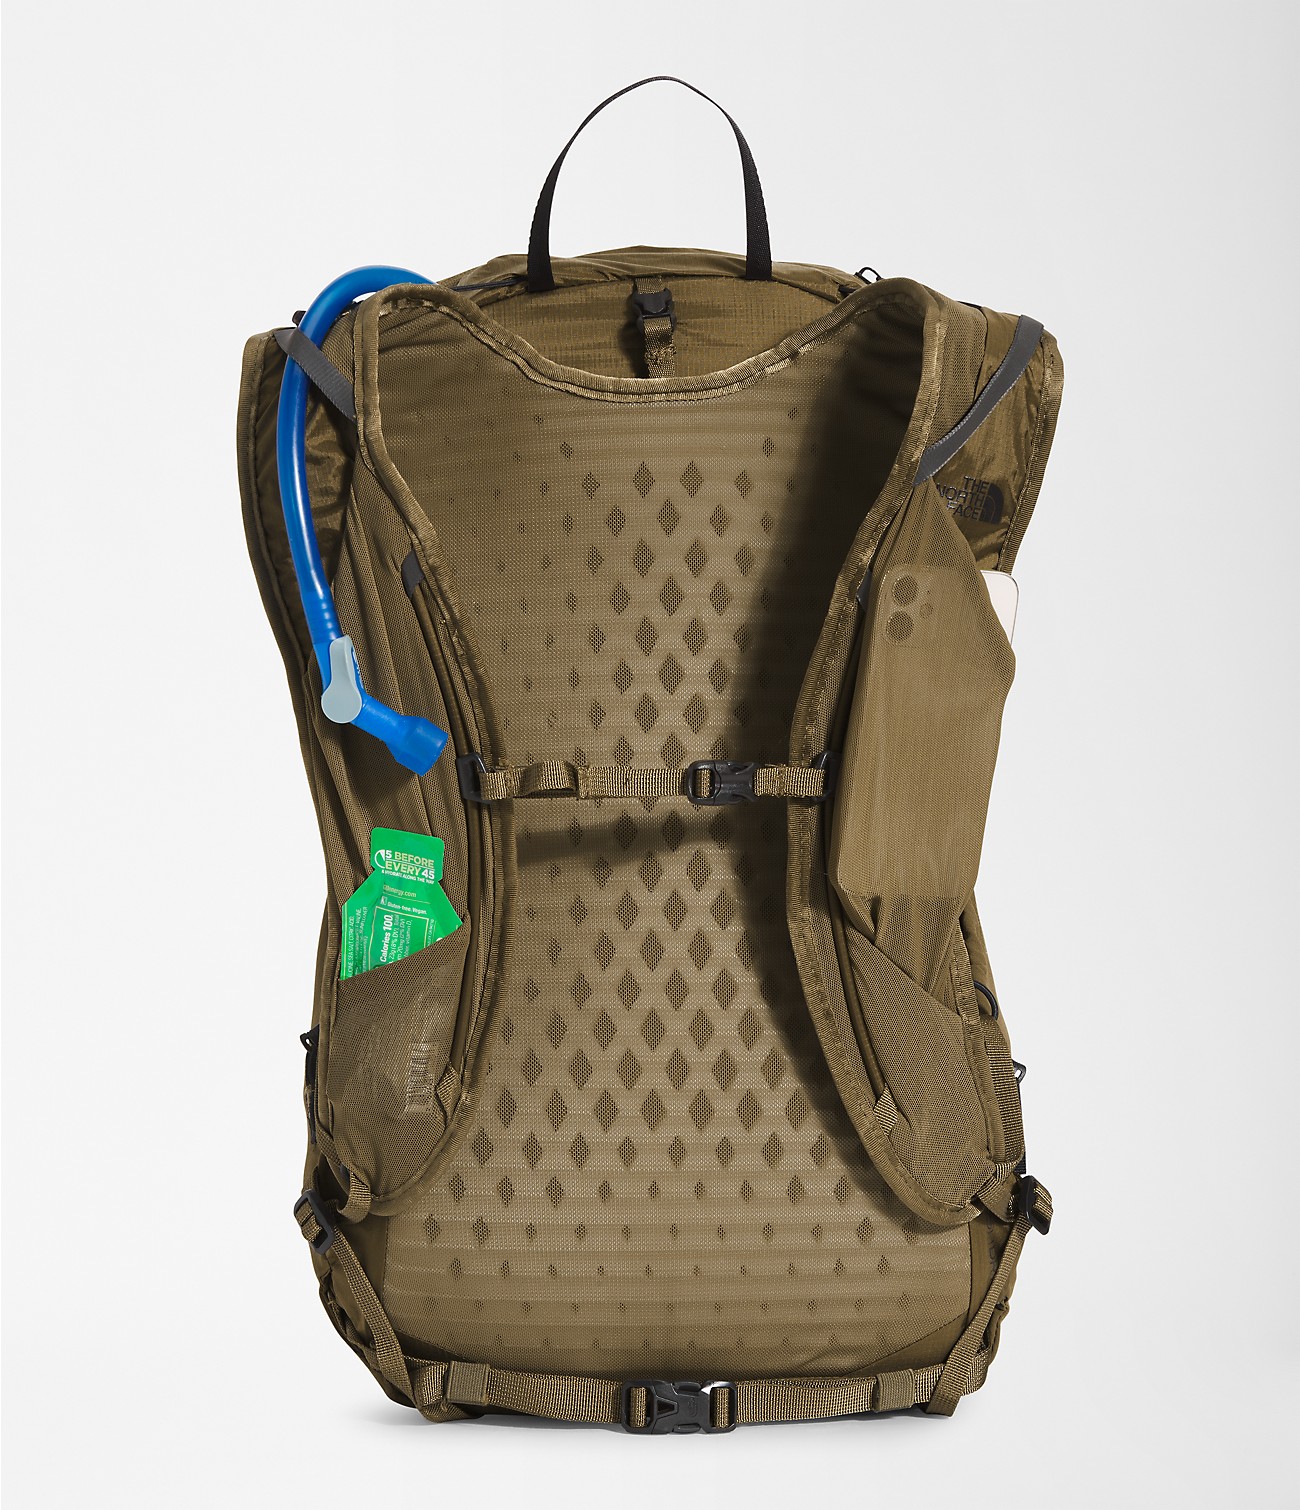 Chimera 18 Backpack | The North Face